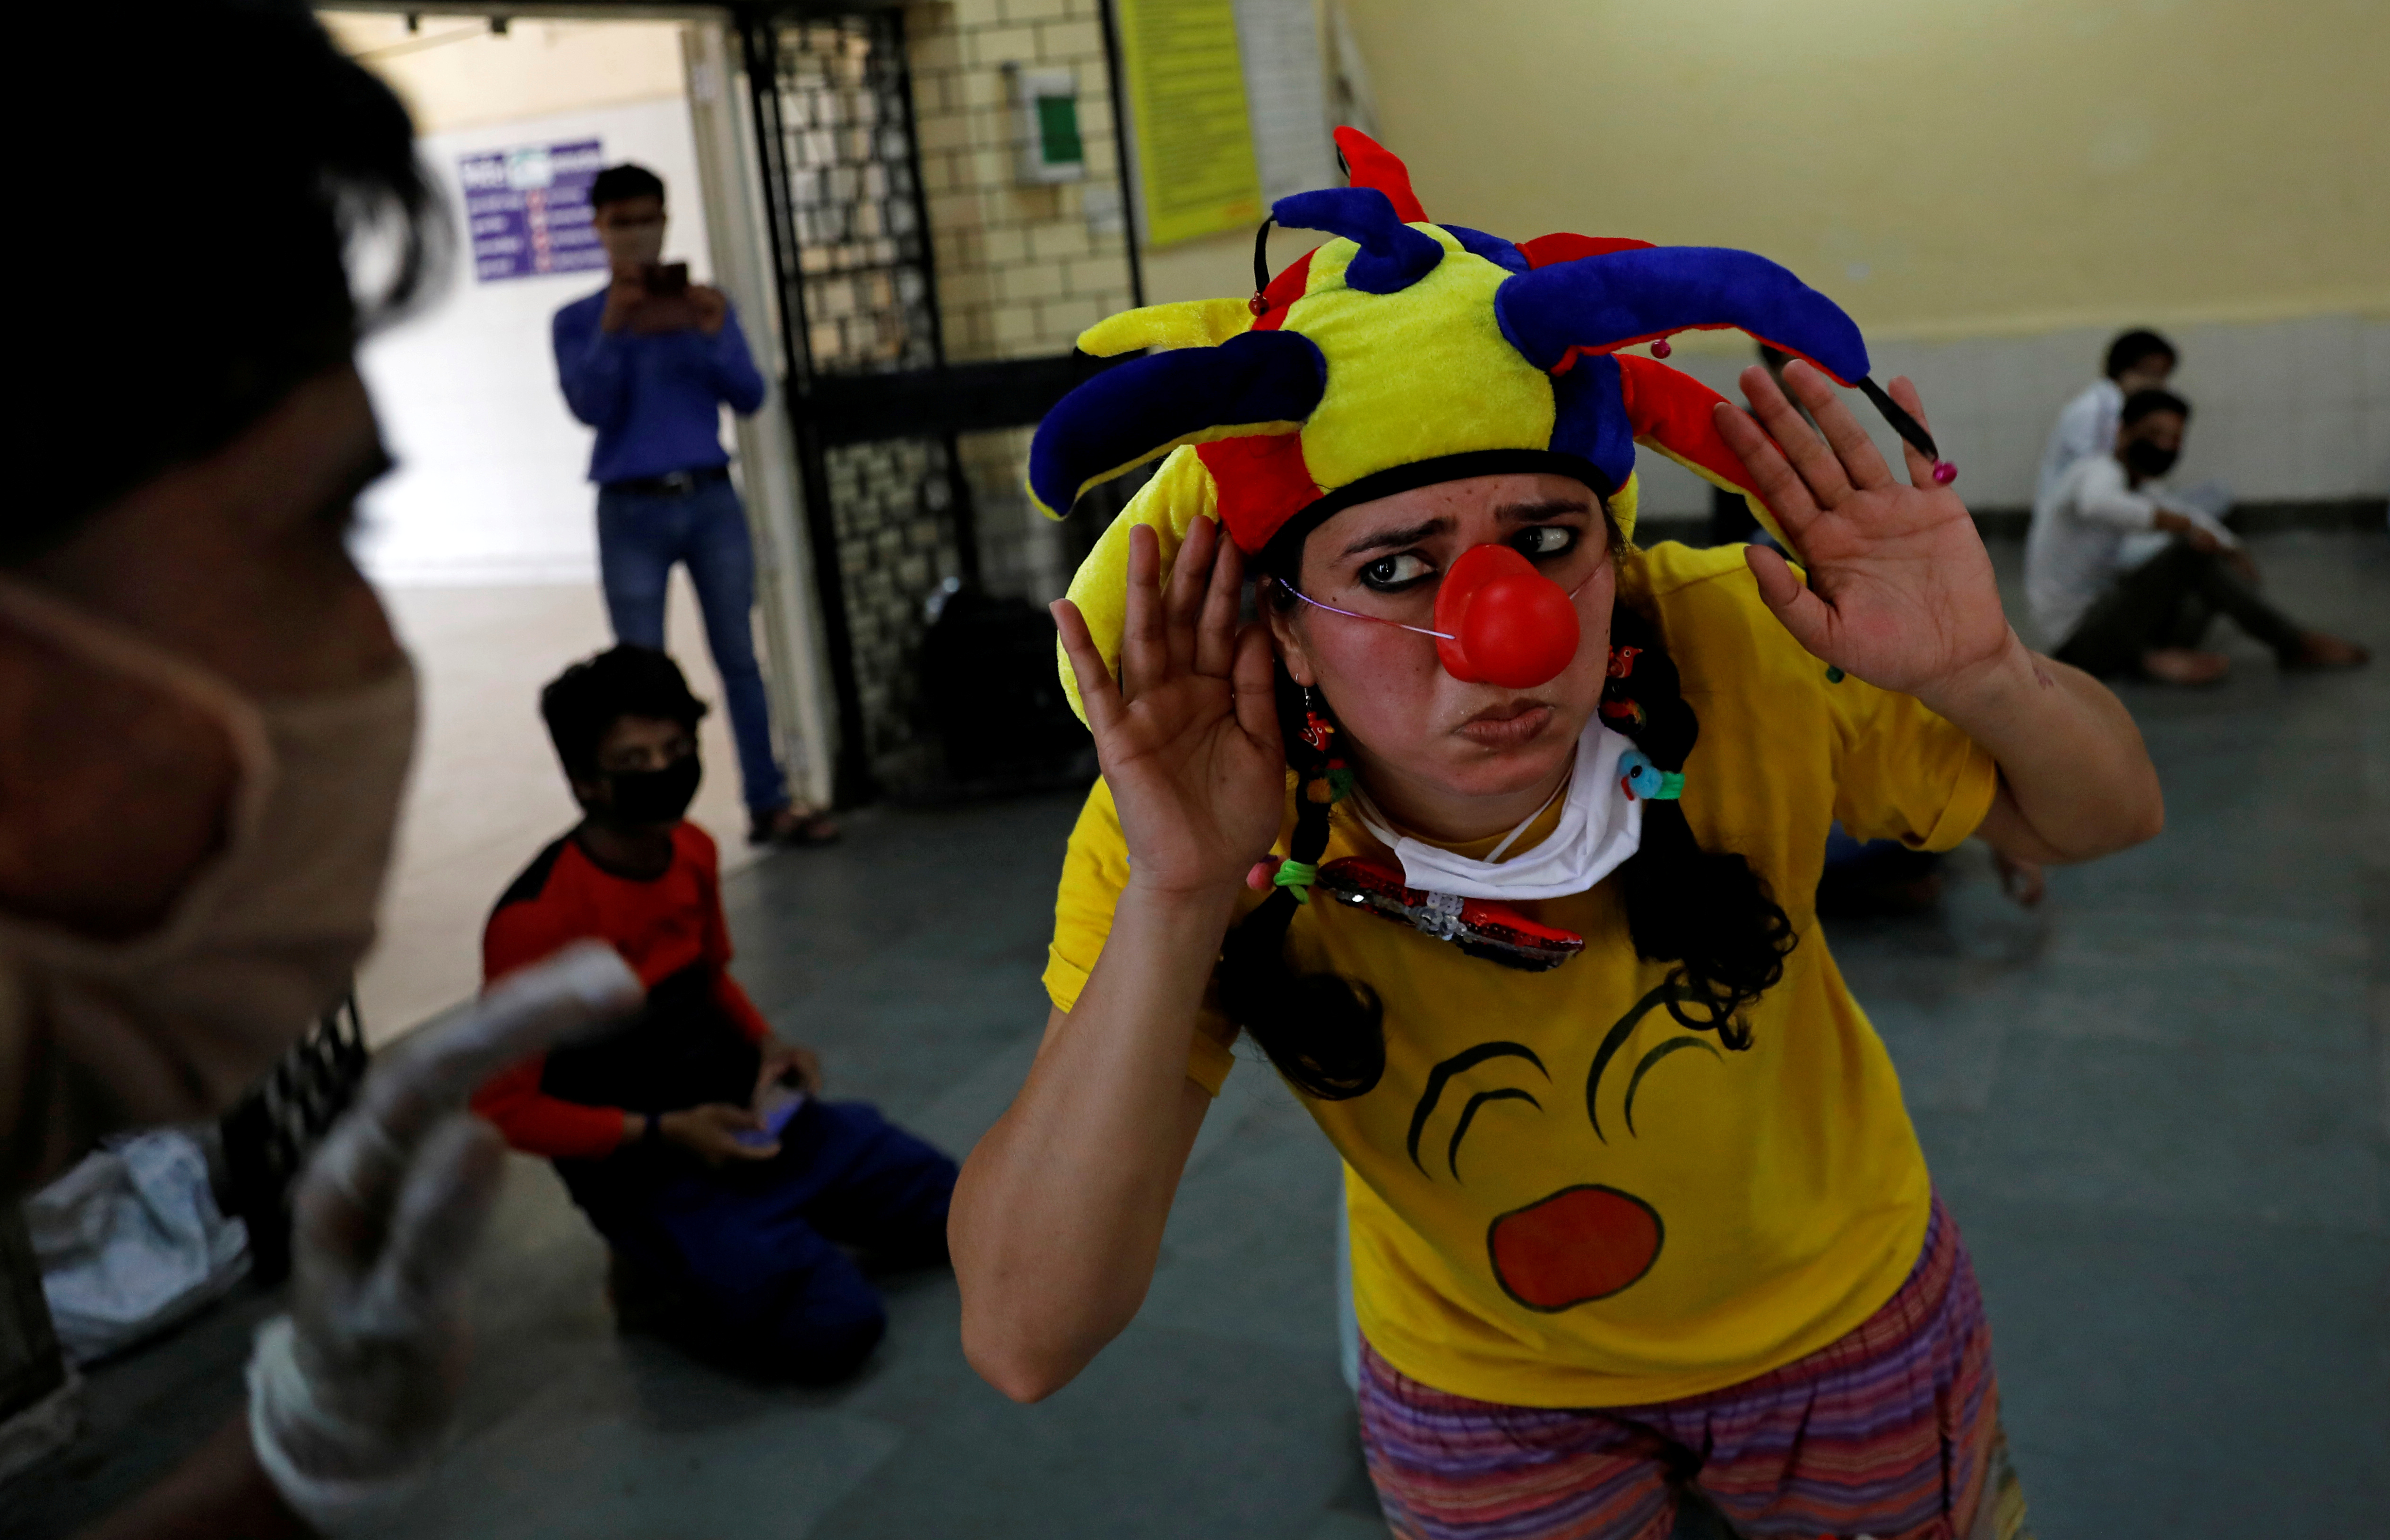 Sheetal Agarwal, 34 and a medical clown, reacts as she performs for people at a shelter, during an extended nationwide lockdown to slow the spread of the coronavirus disease (COVID-19), in New Delhi, India, May 2, 2020. Photo: Reuters